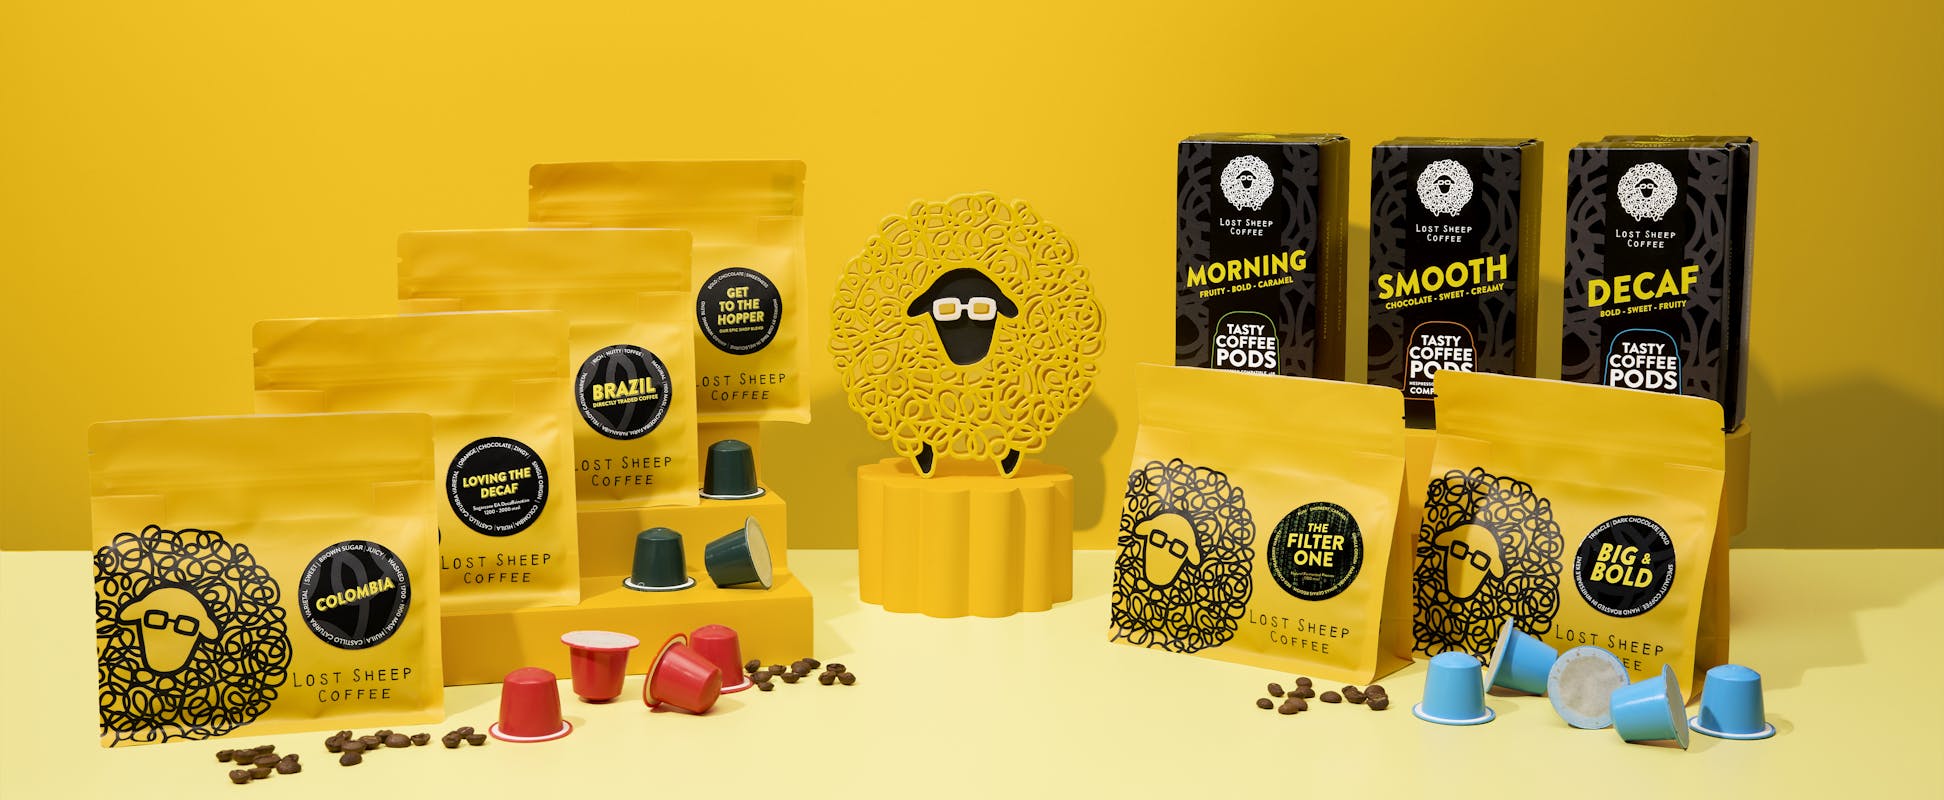 A collection of Lost Sheep Coffee Products including speciality coffee beans and Nespresso coffee pods on a yellow background